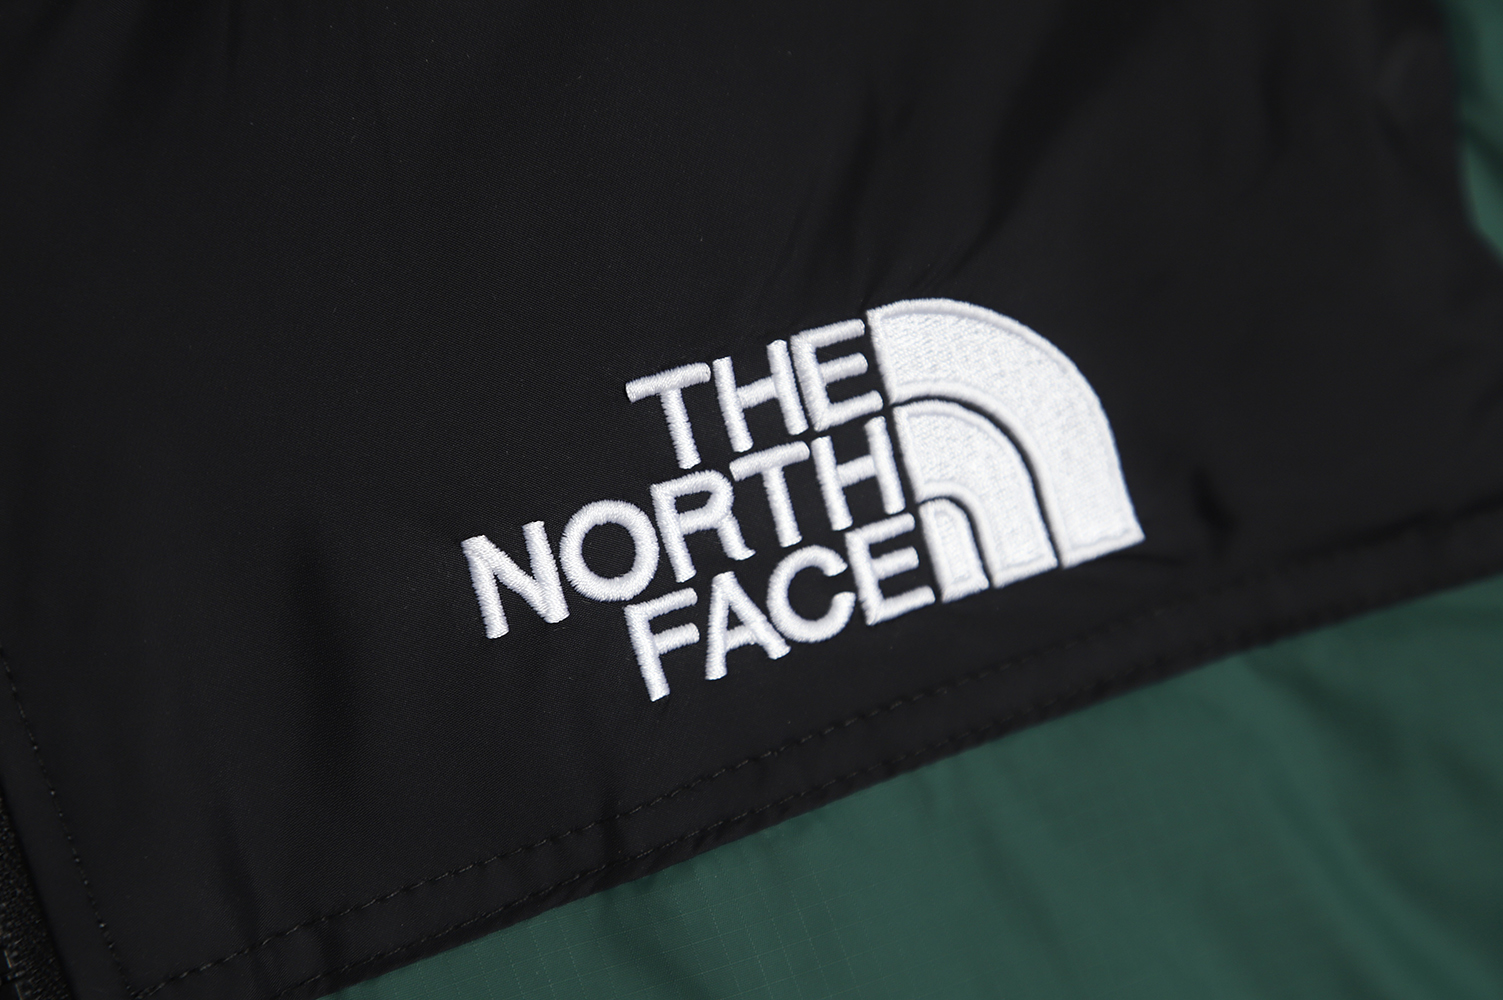 The North Face 1996 down jacket 5s version TSK6